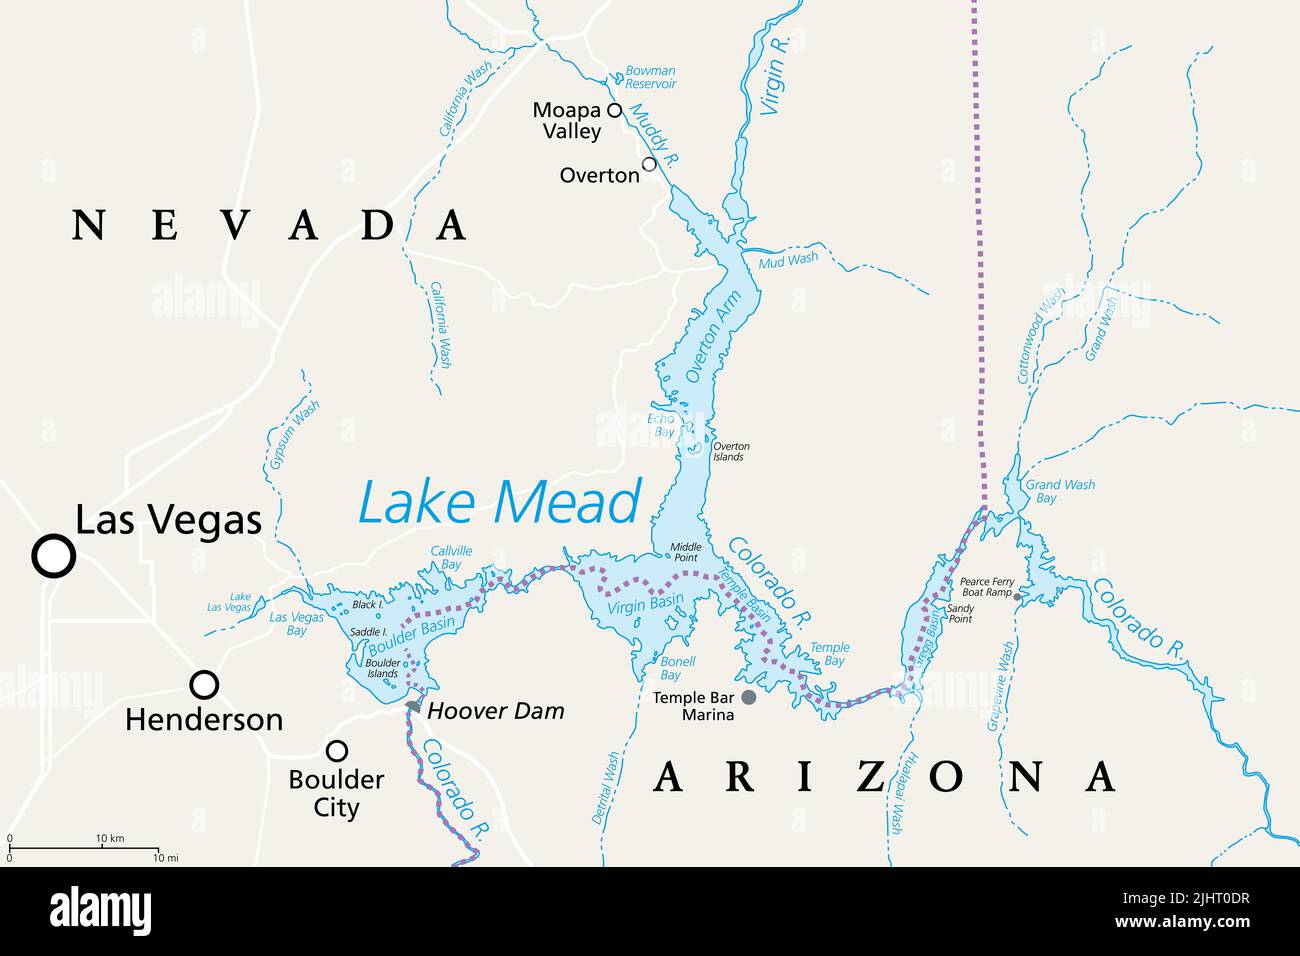 Lake Mead, largest reservoir in the US, political map. Formed by the Hoover Dam on the Colorado River in the Southwestern United States. Stock Photo